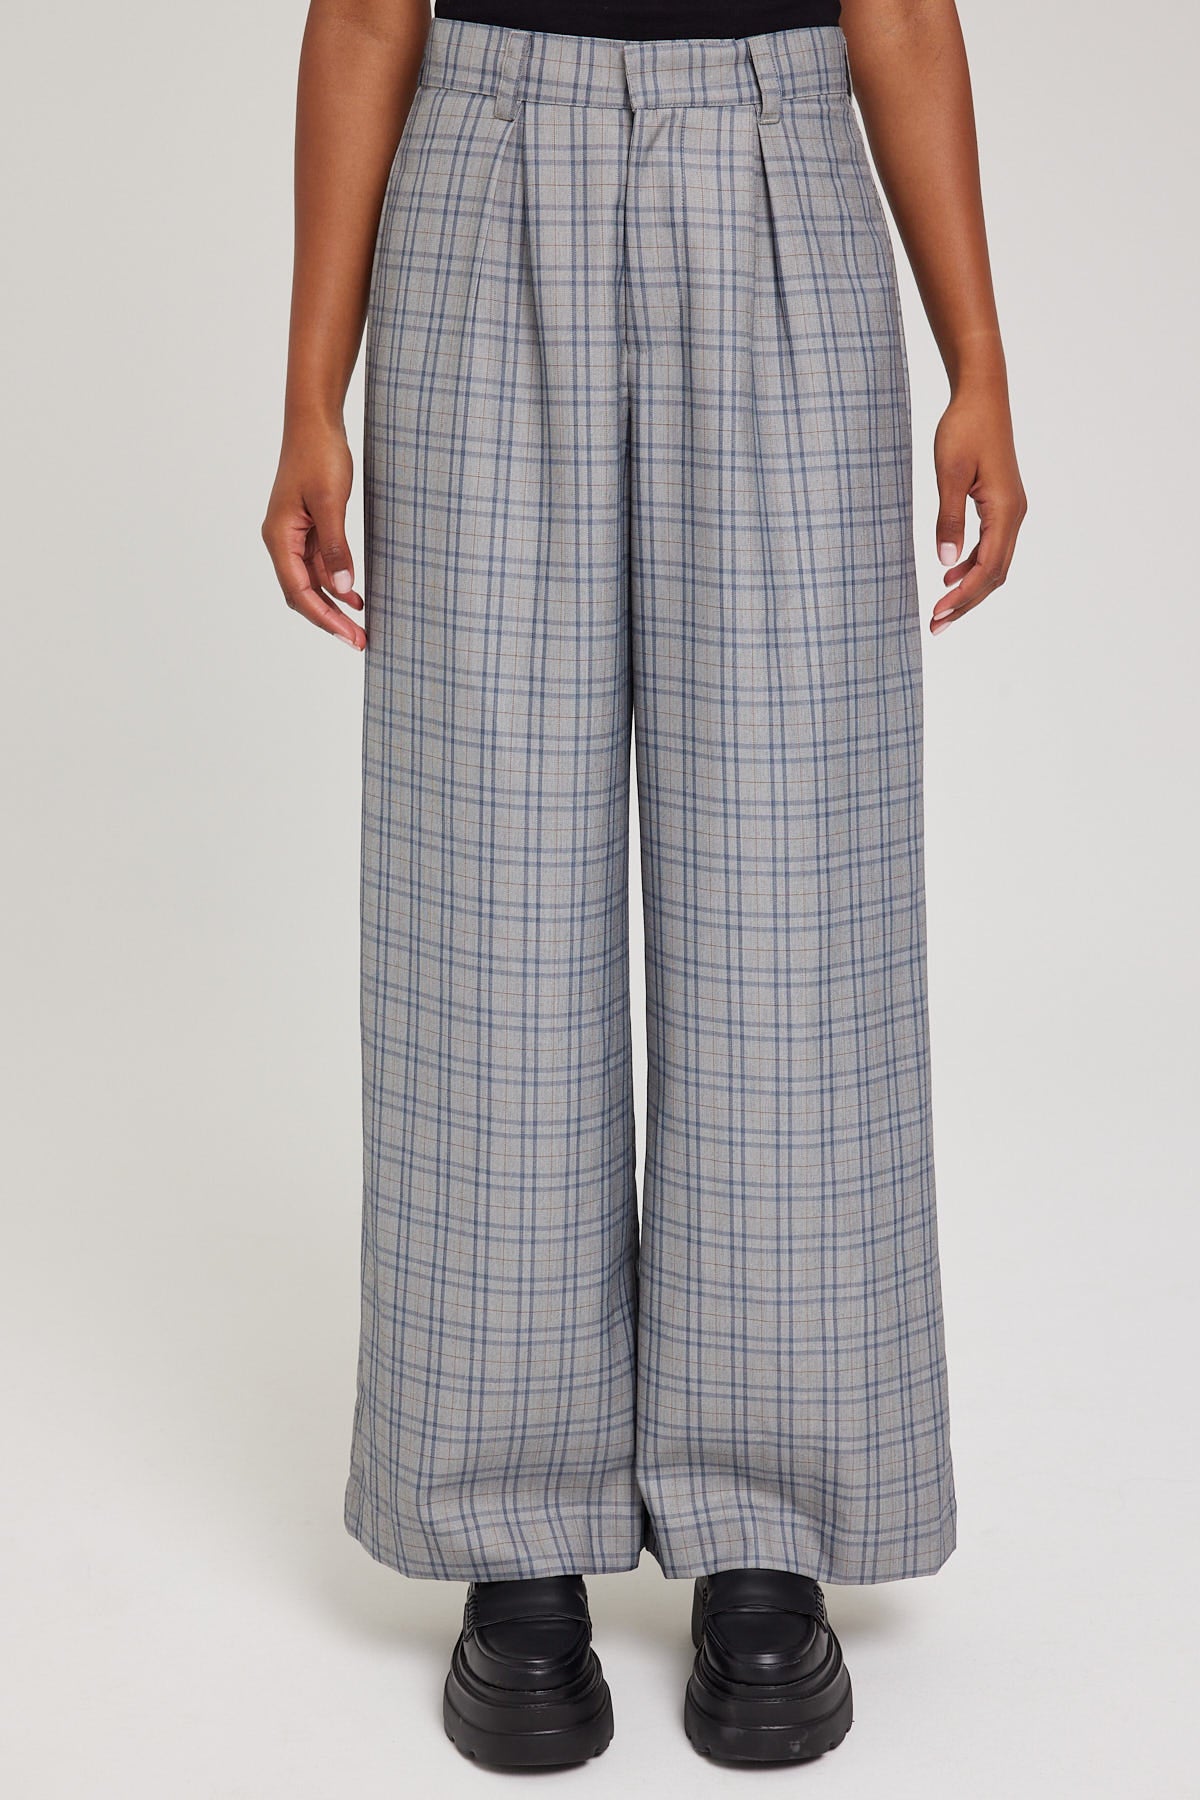 Perfect Stranger Cameron Mid Rise Pant Grey Check – Universal Store